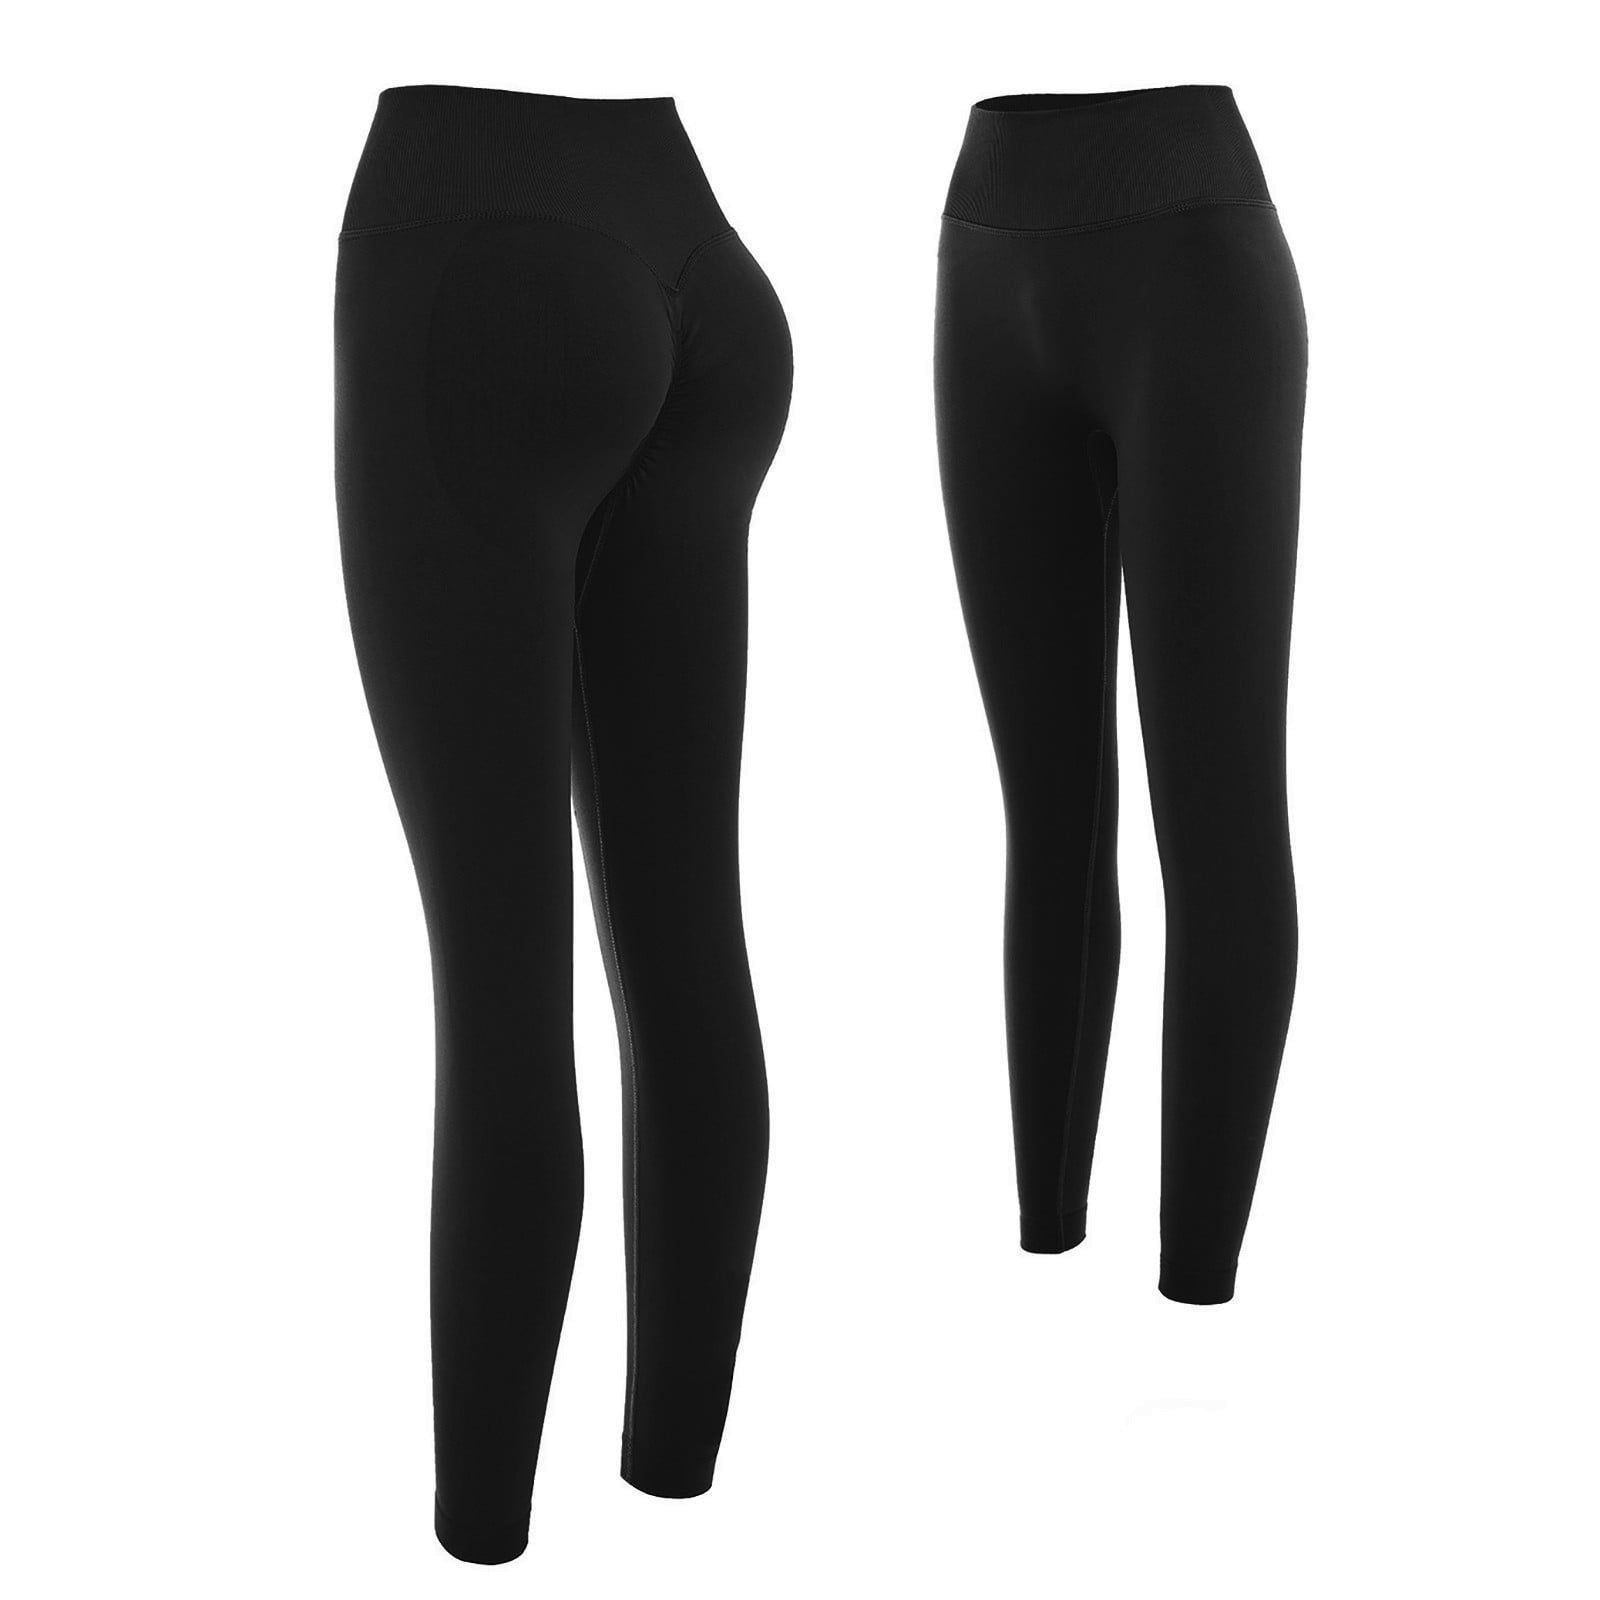 FRESOUGHT High Waisted Leggings for Women,Seamless Gym Workout Tummy  Control Active Yoga Pants Butt Lifting Tights Black XS at  Women's  Clothing store